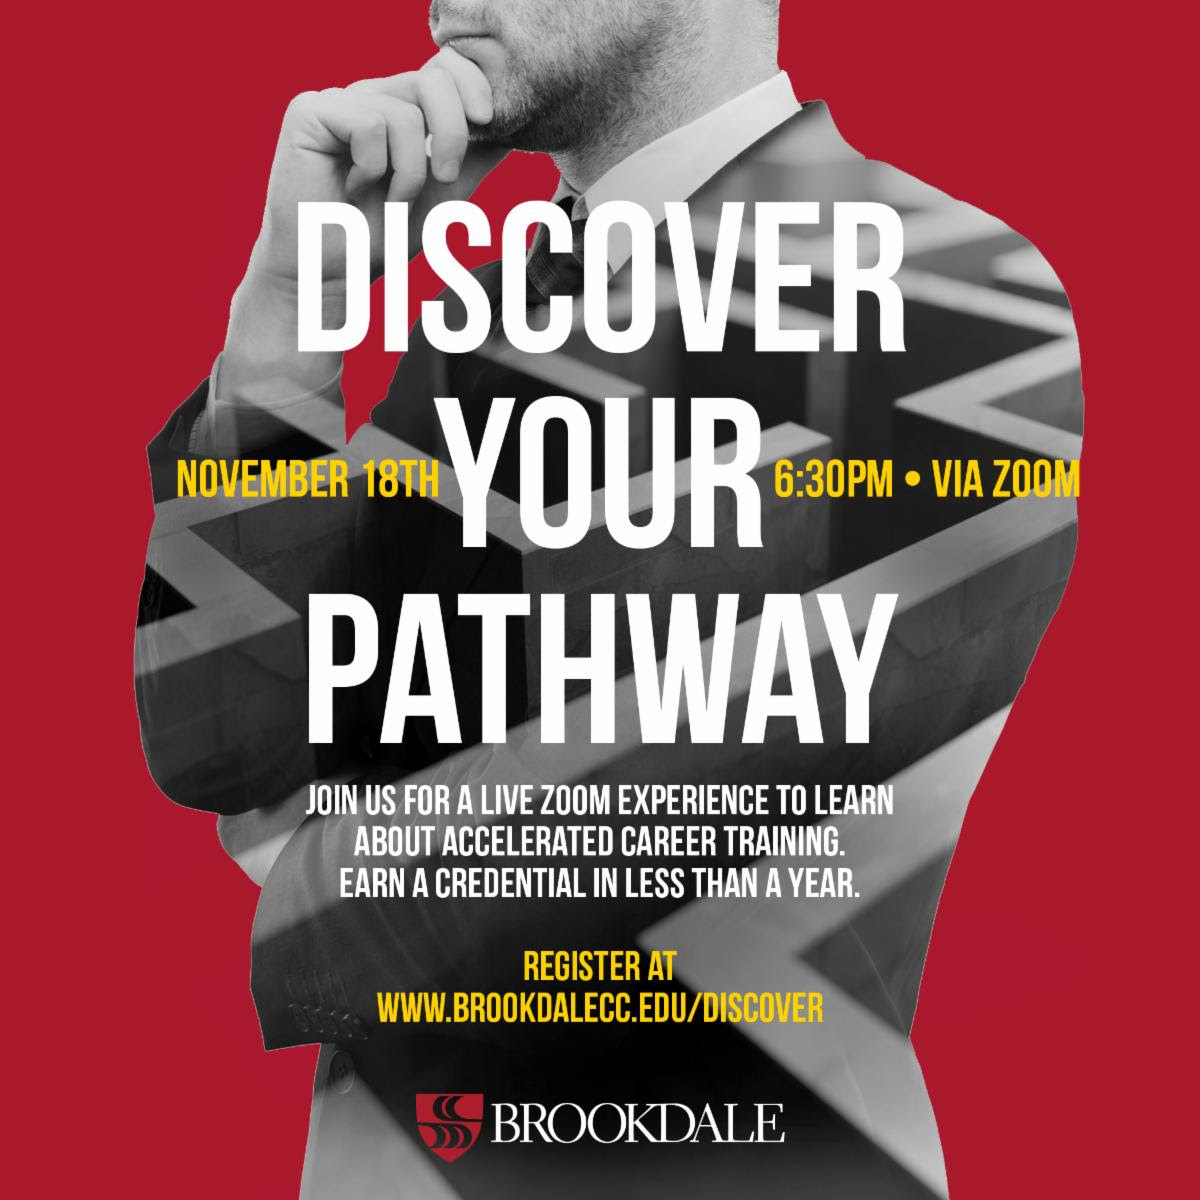 Discover your pathway